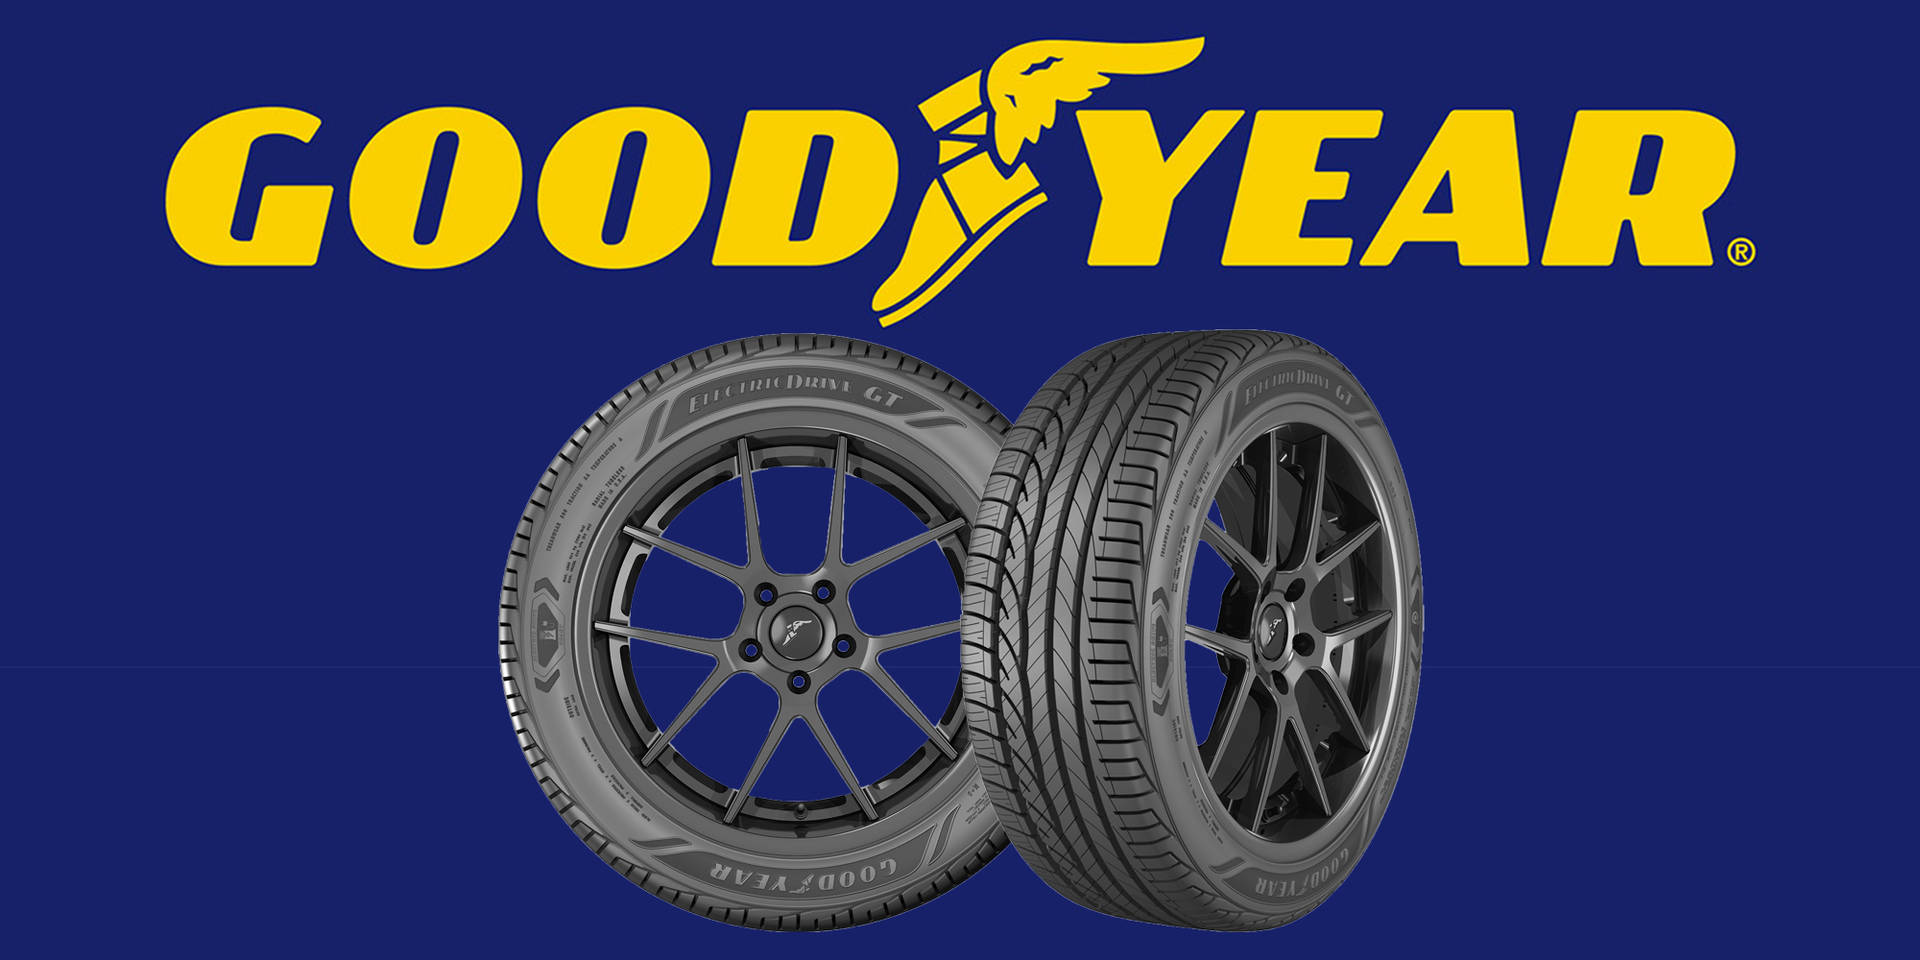 Goodyear Logo With Tires Wallpaper